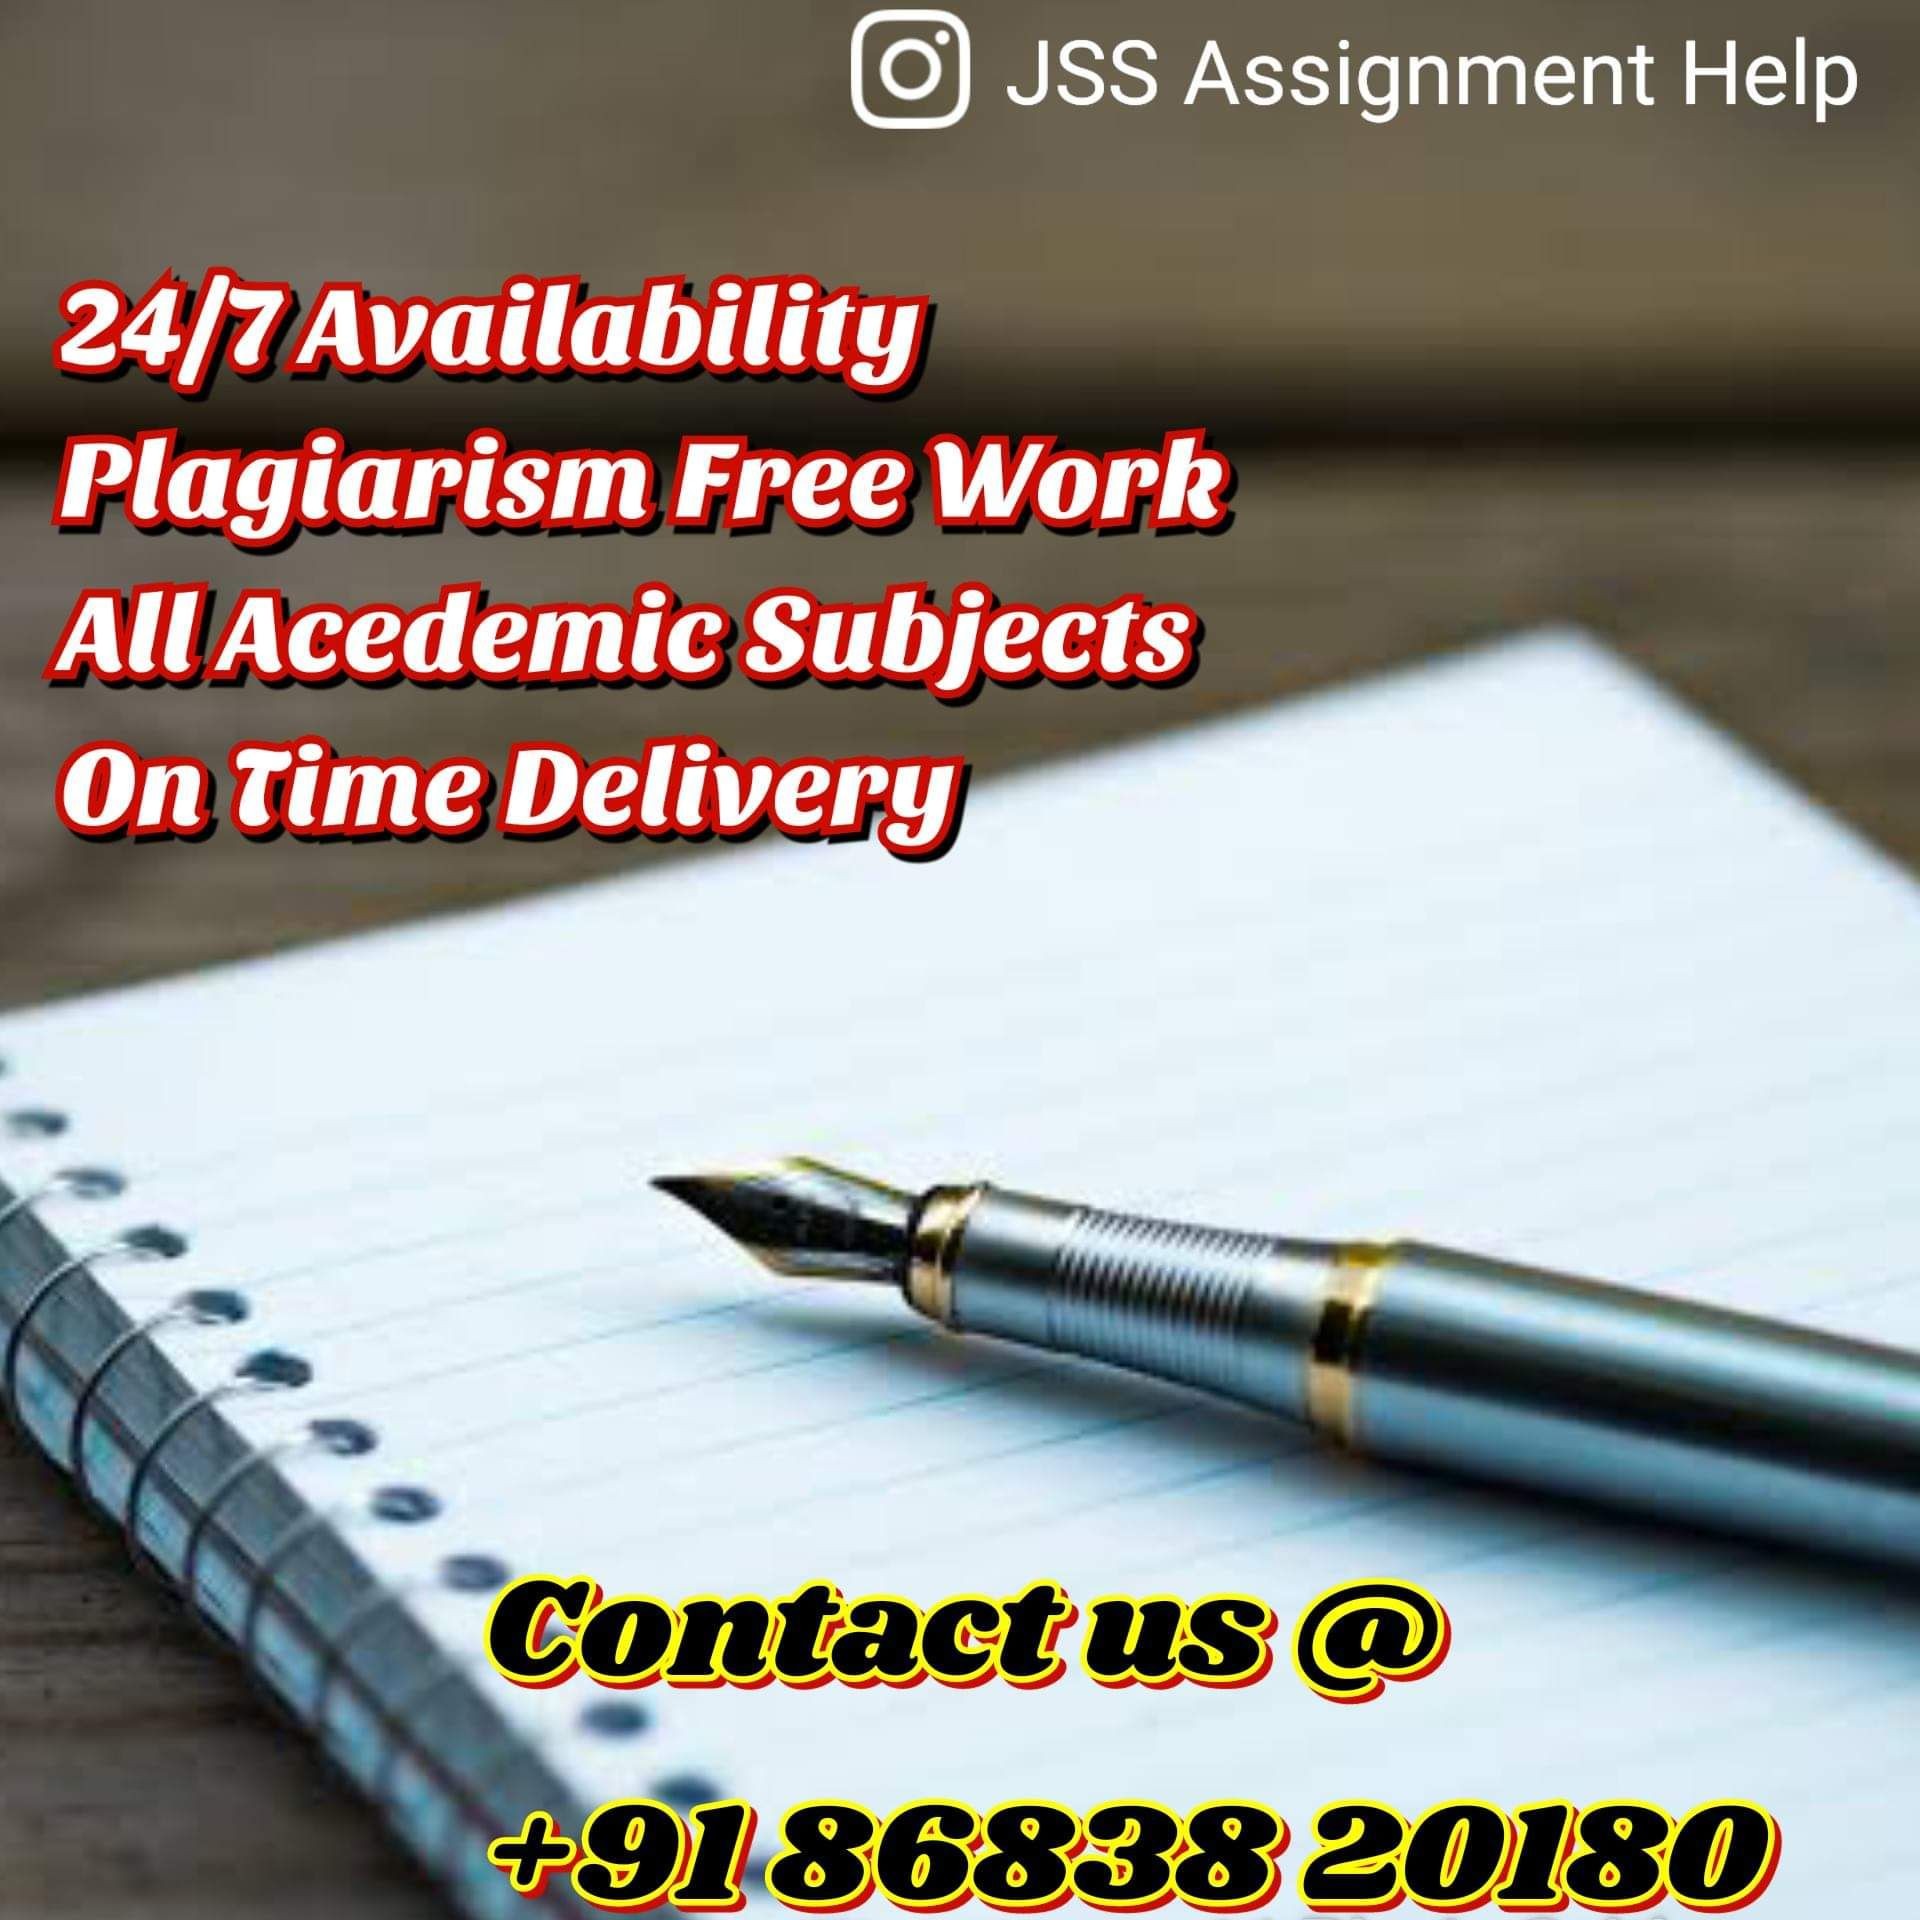 All type of assignments | Instagram: @jssassignmenthelp